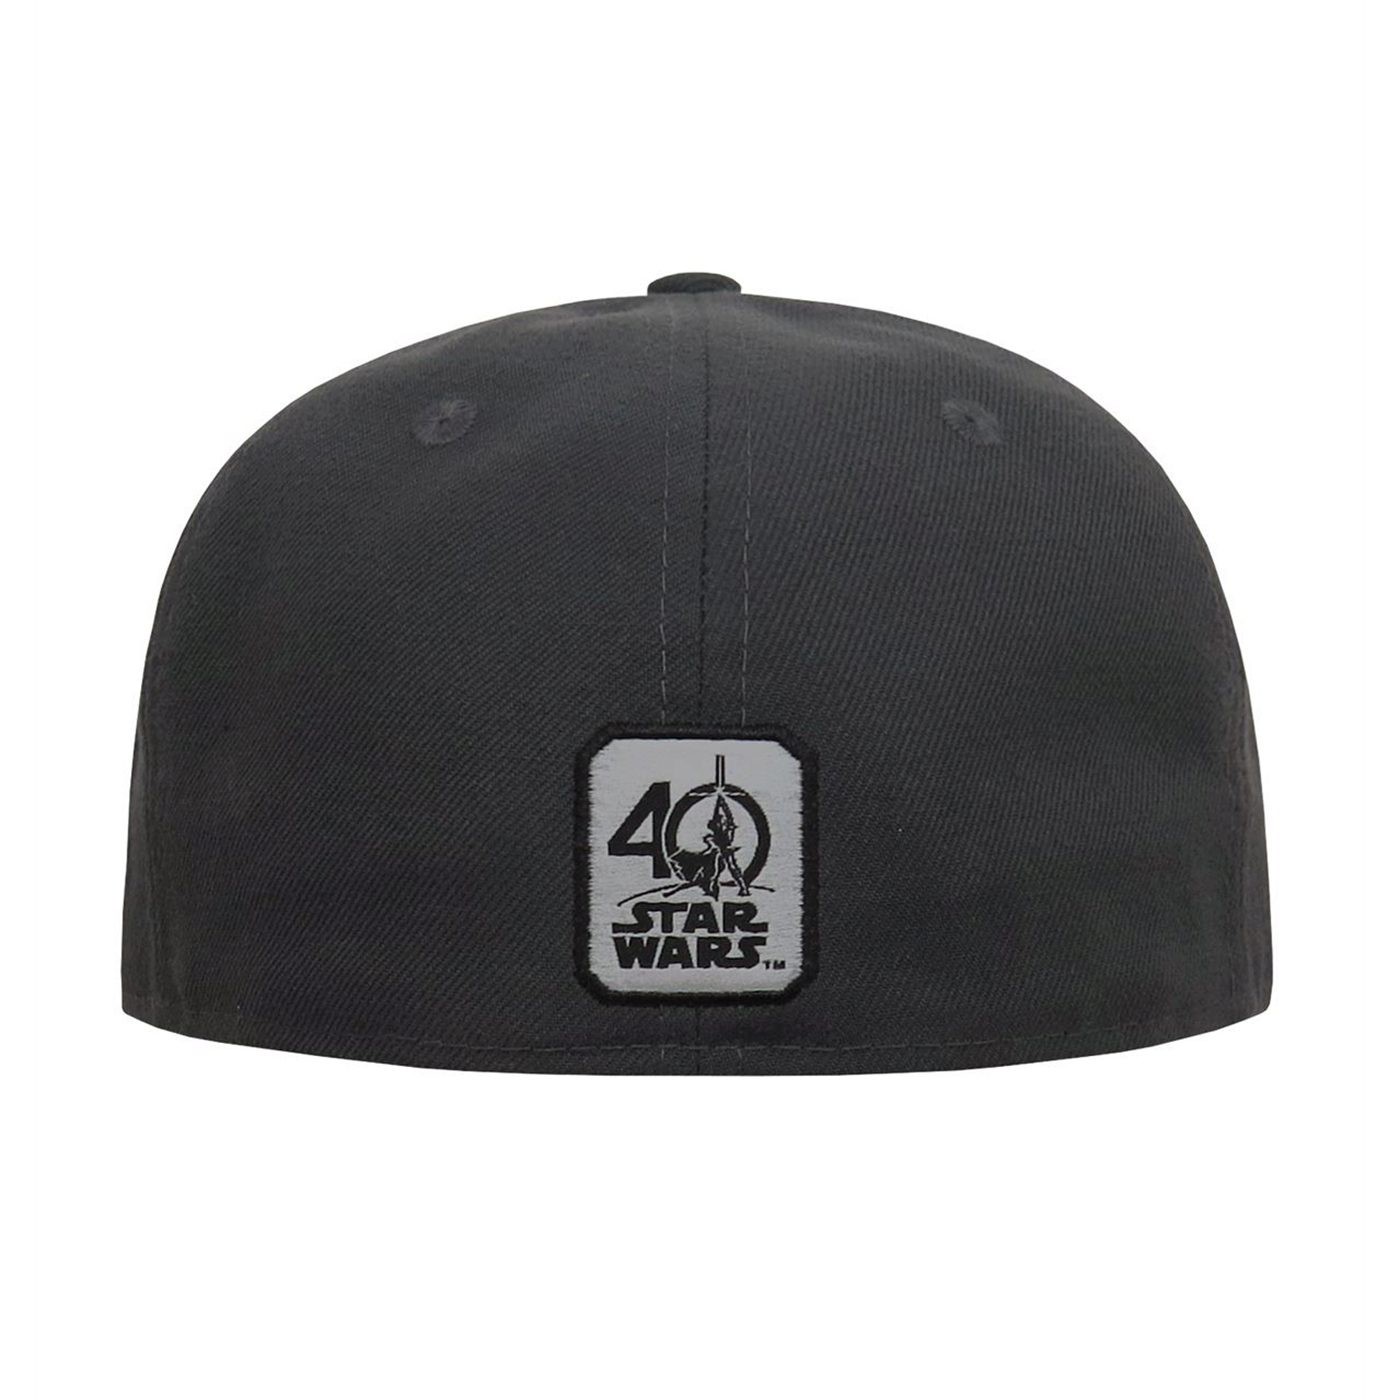 Star Wars 40th Stormtrooper 59Fifty Fitted Hat